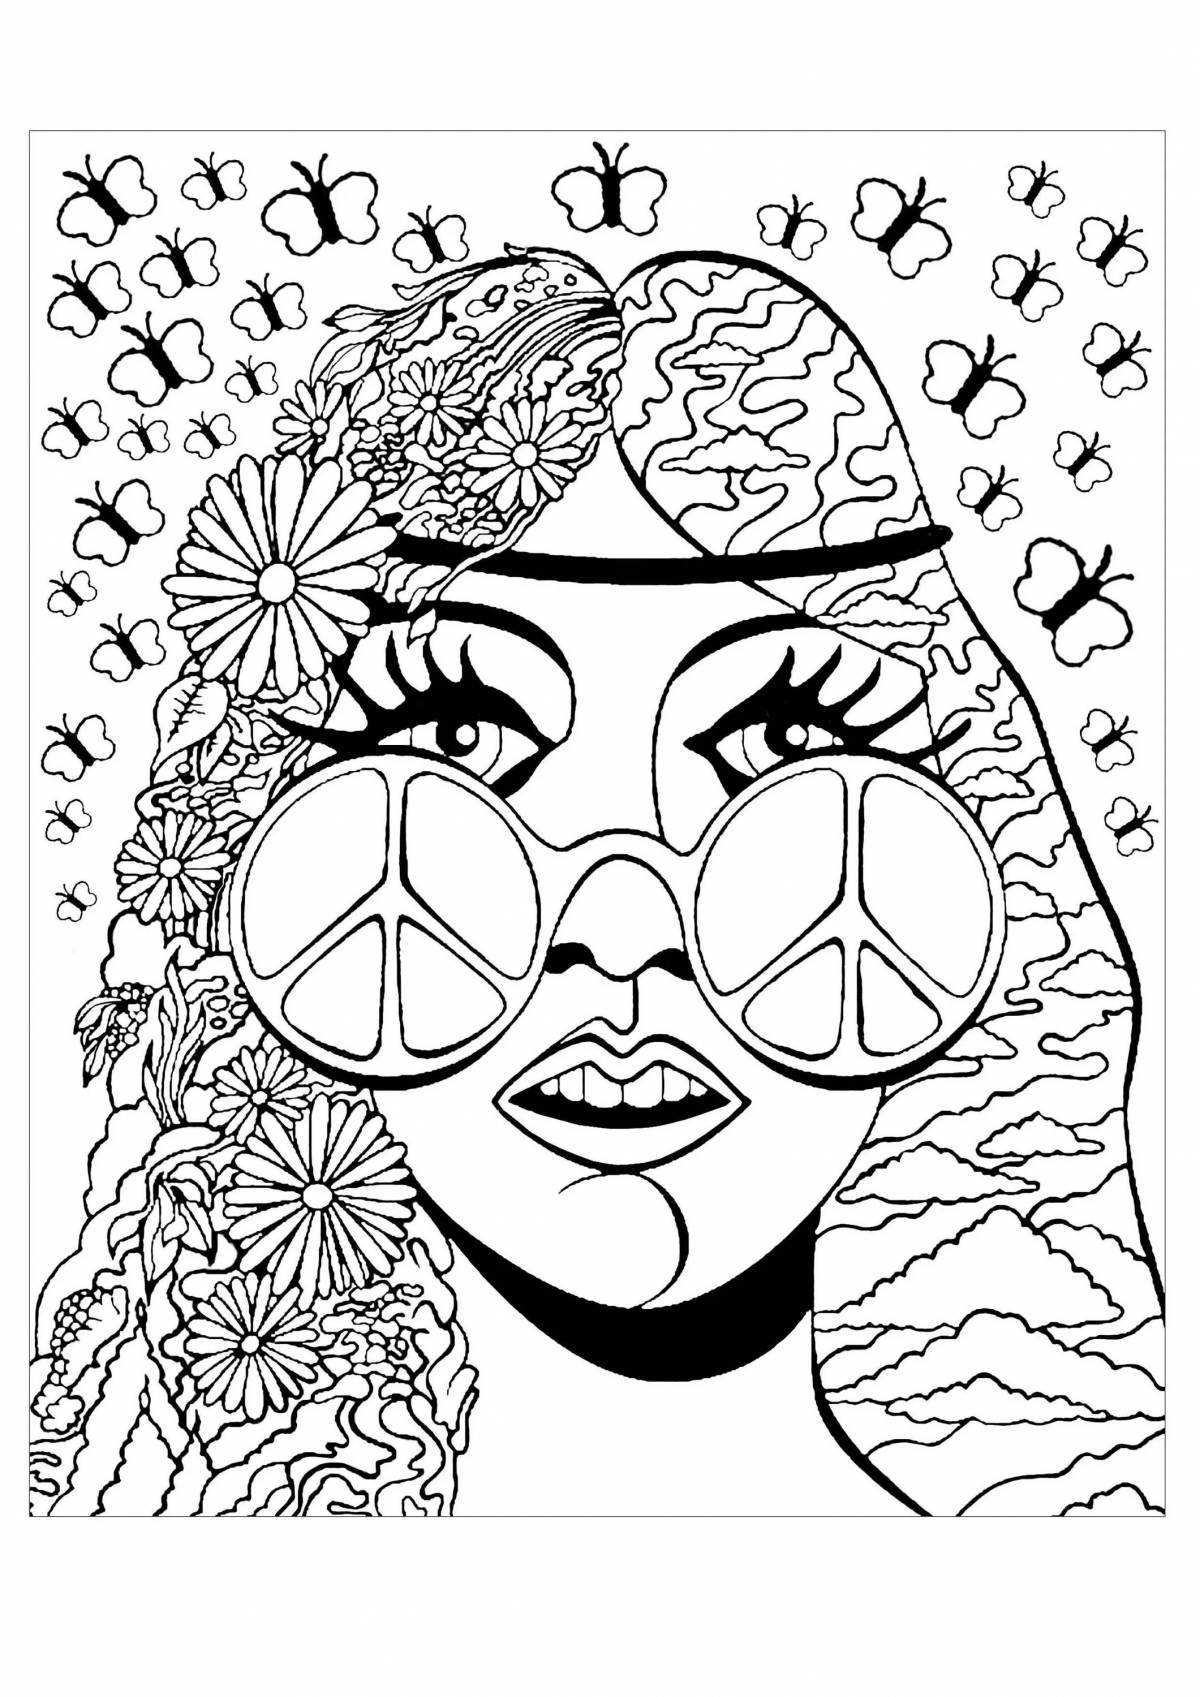 Hippie holiday coloring book